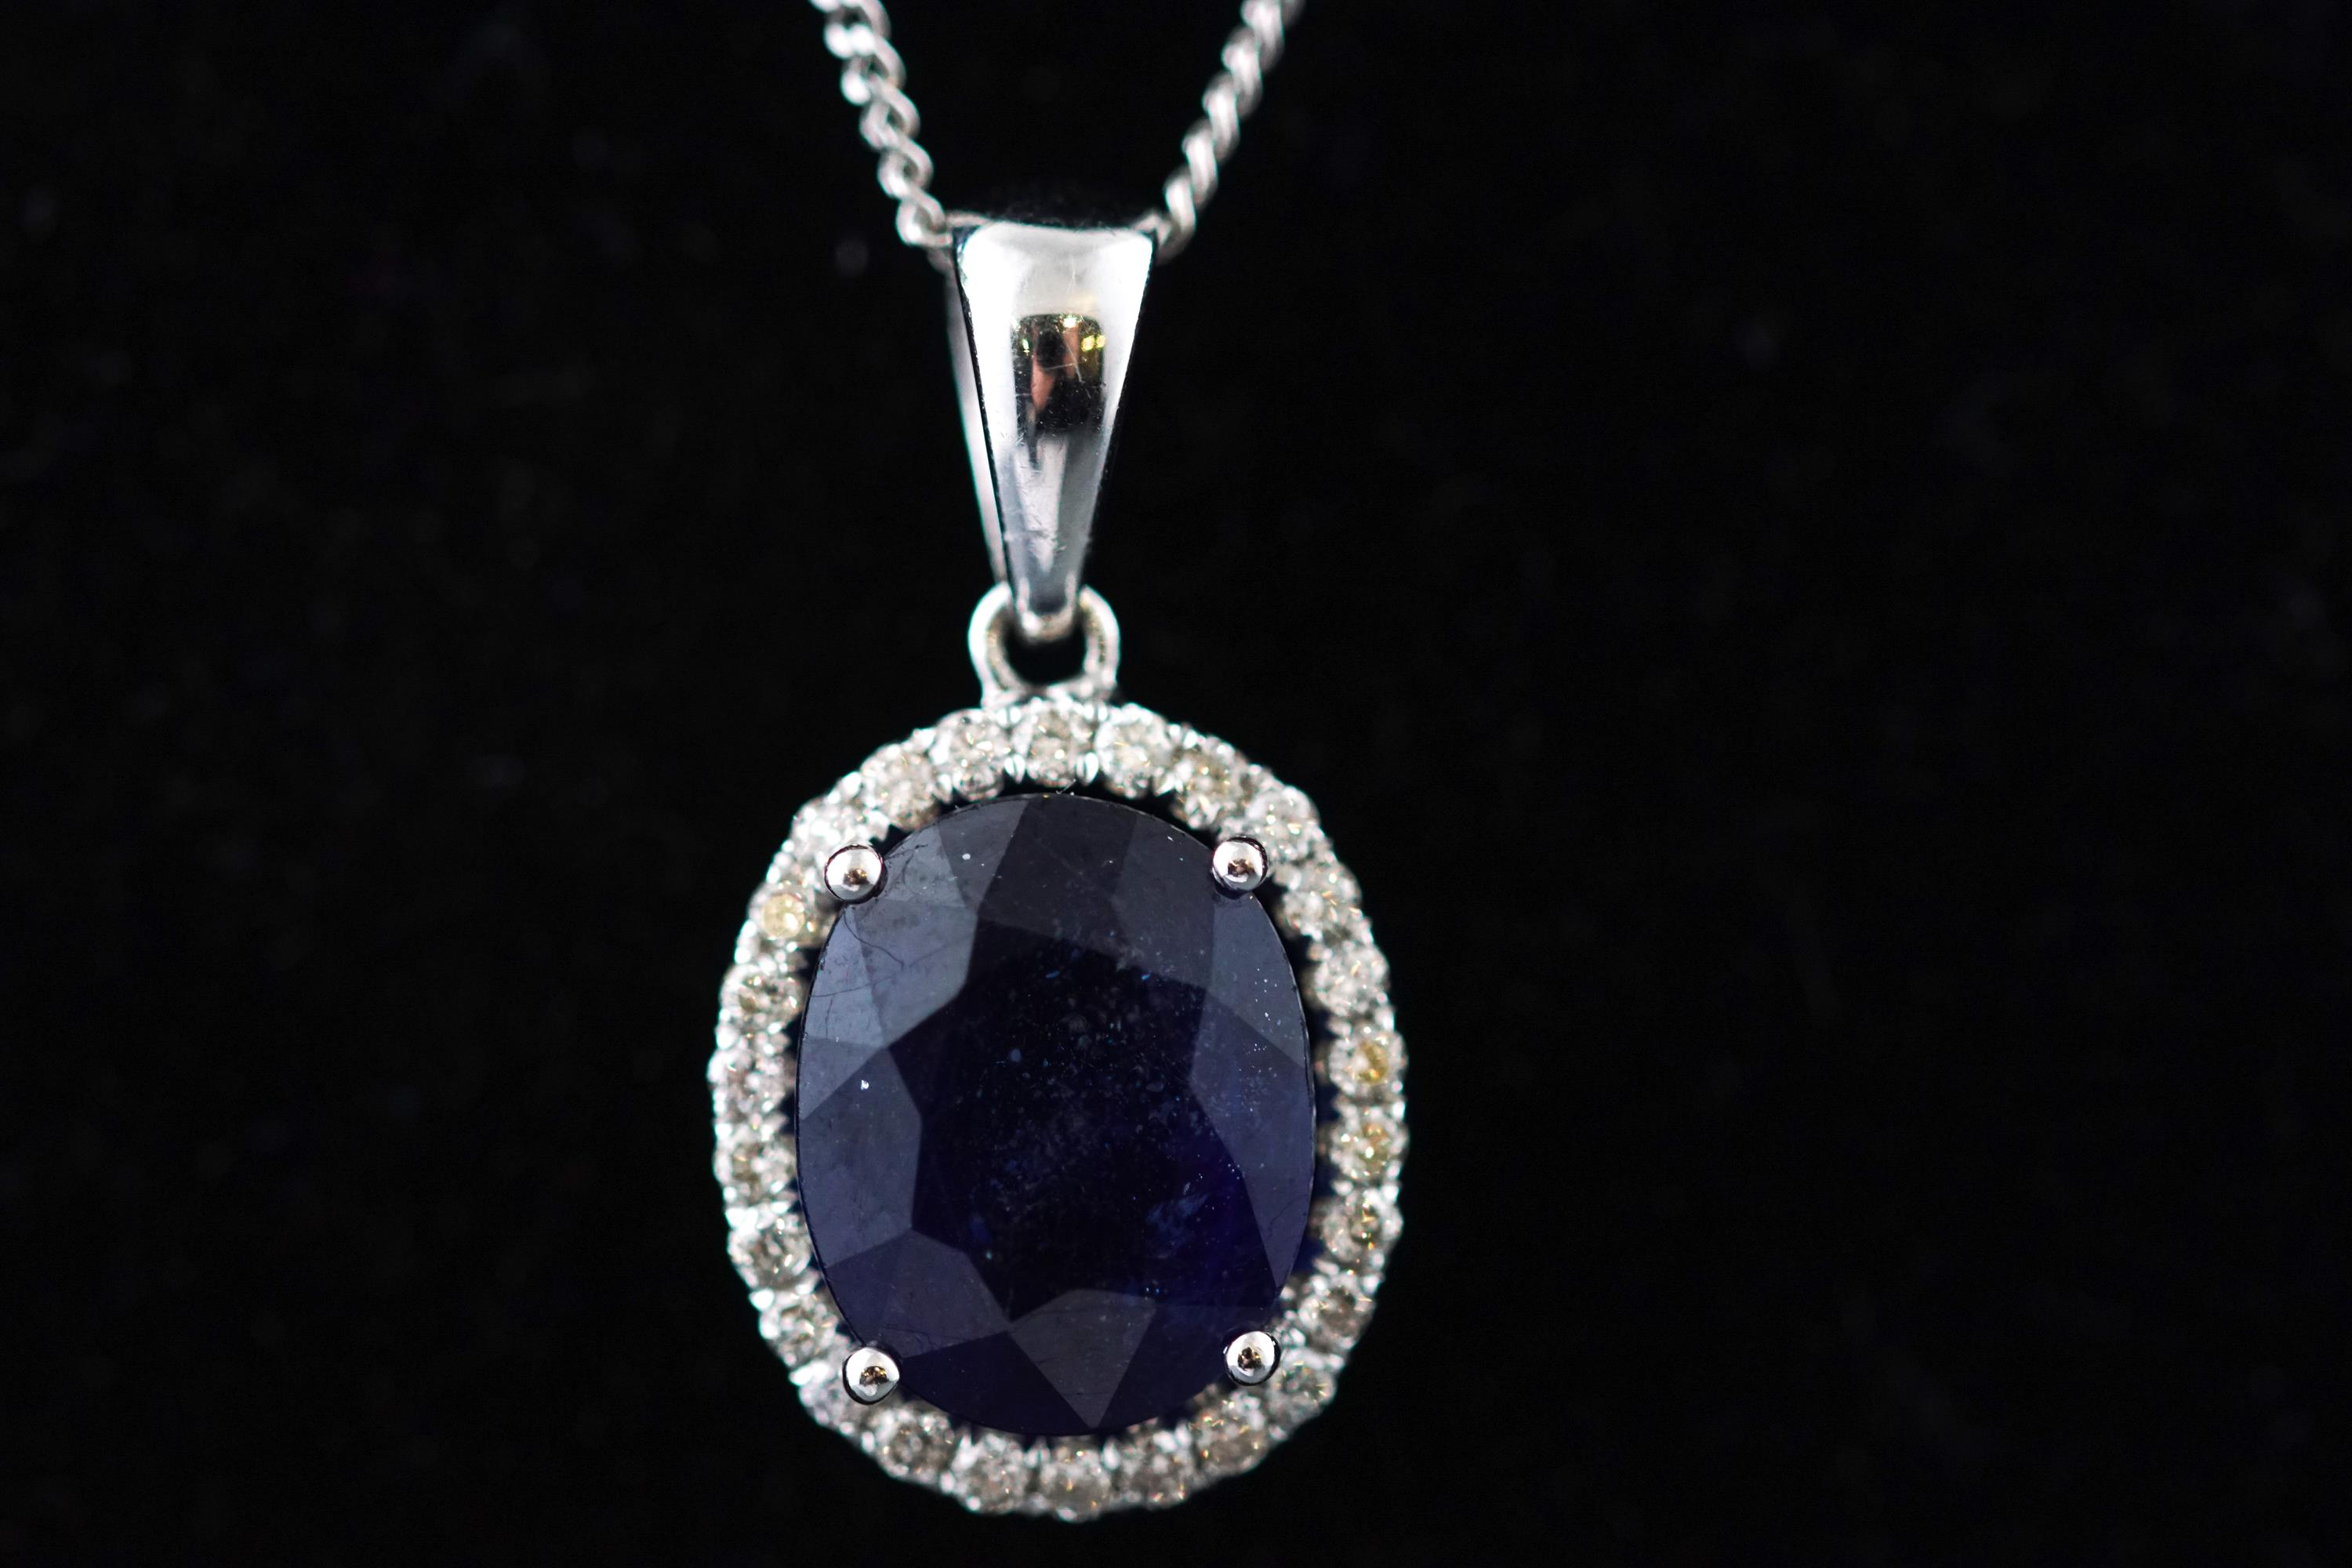 A modern white metal cluster pendant set with an oval faceted sapphire* and surrounded by diamonds.